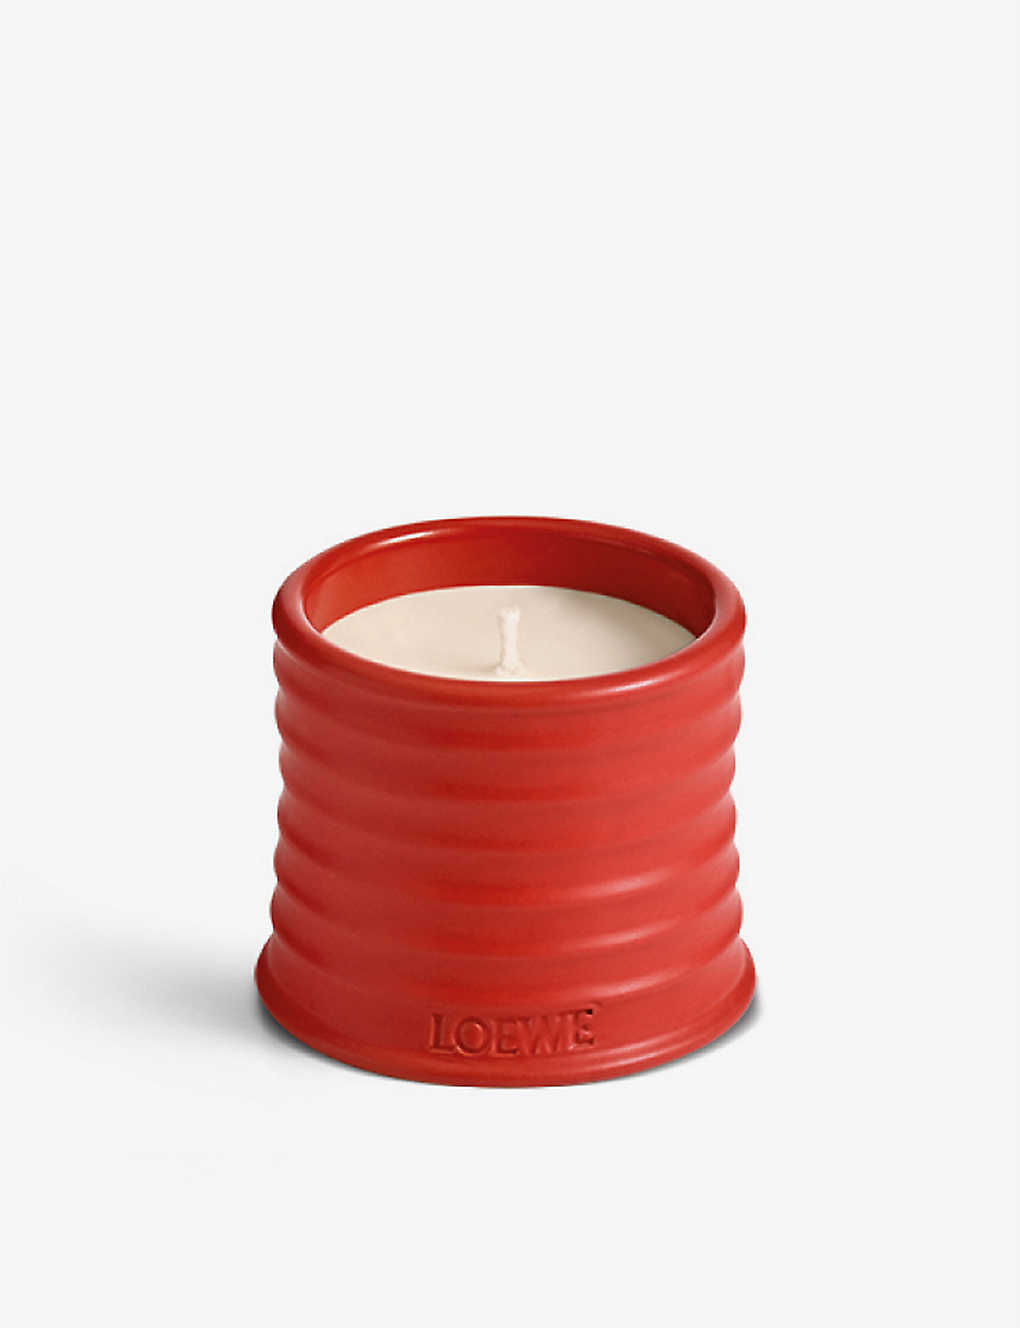 Loewe Tomato Leaves Scented Candle 170g